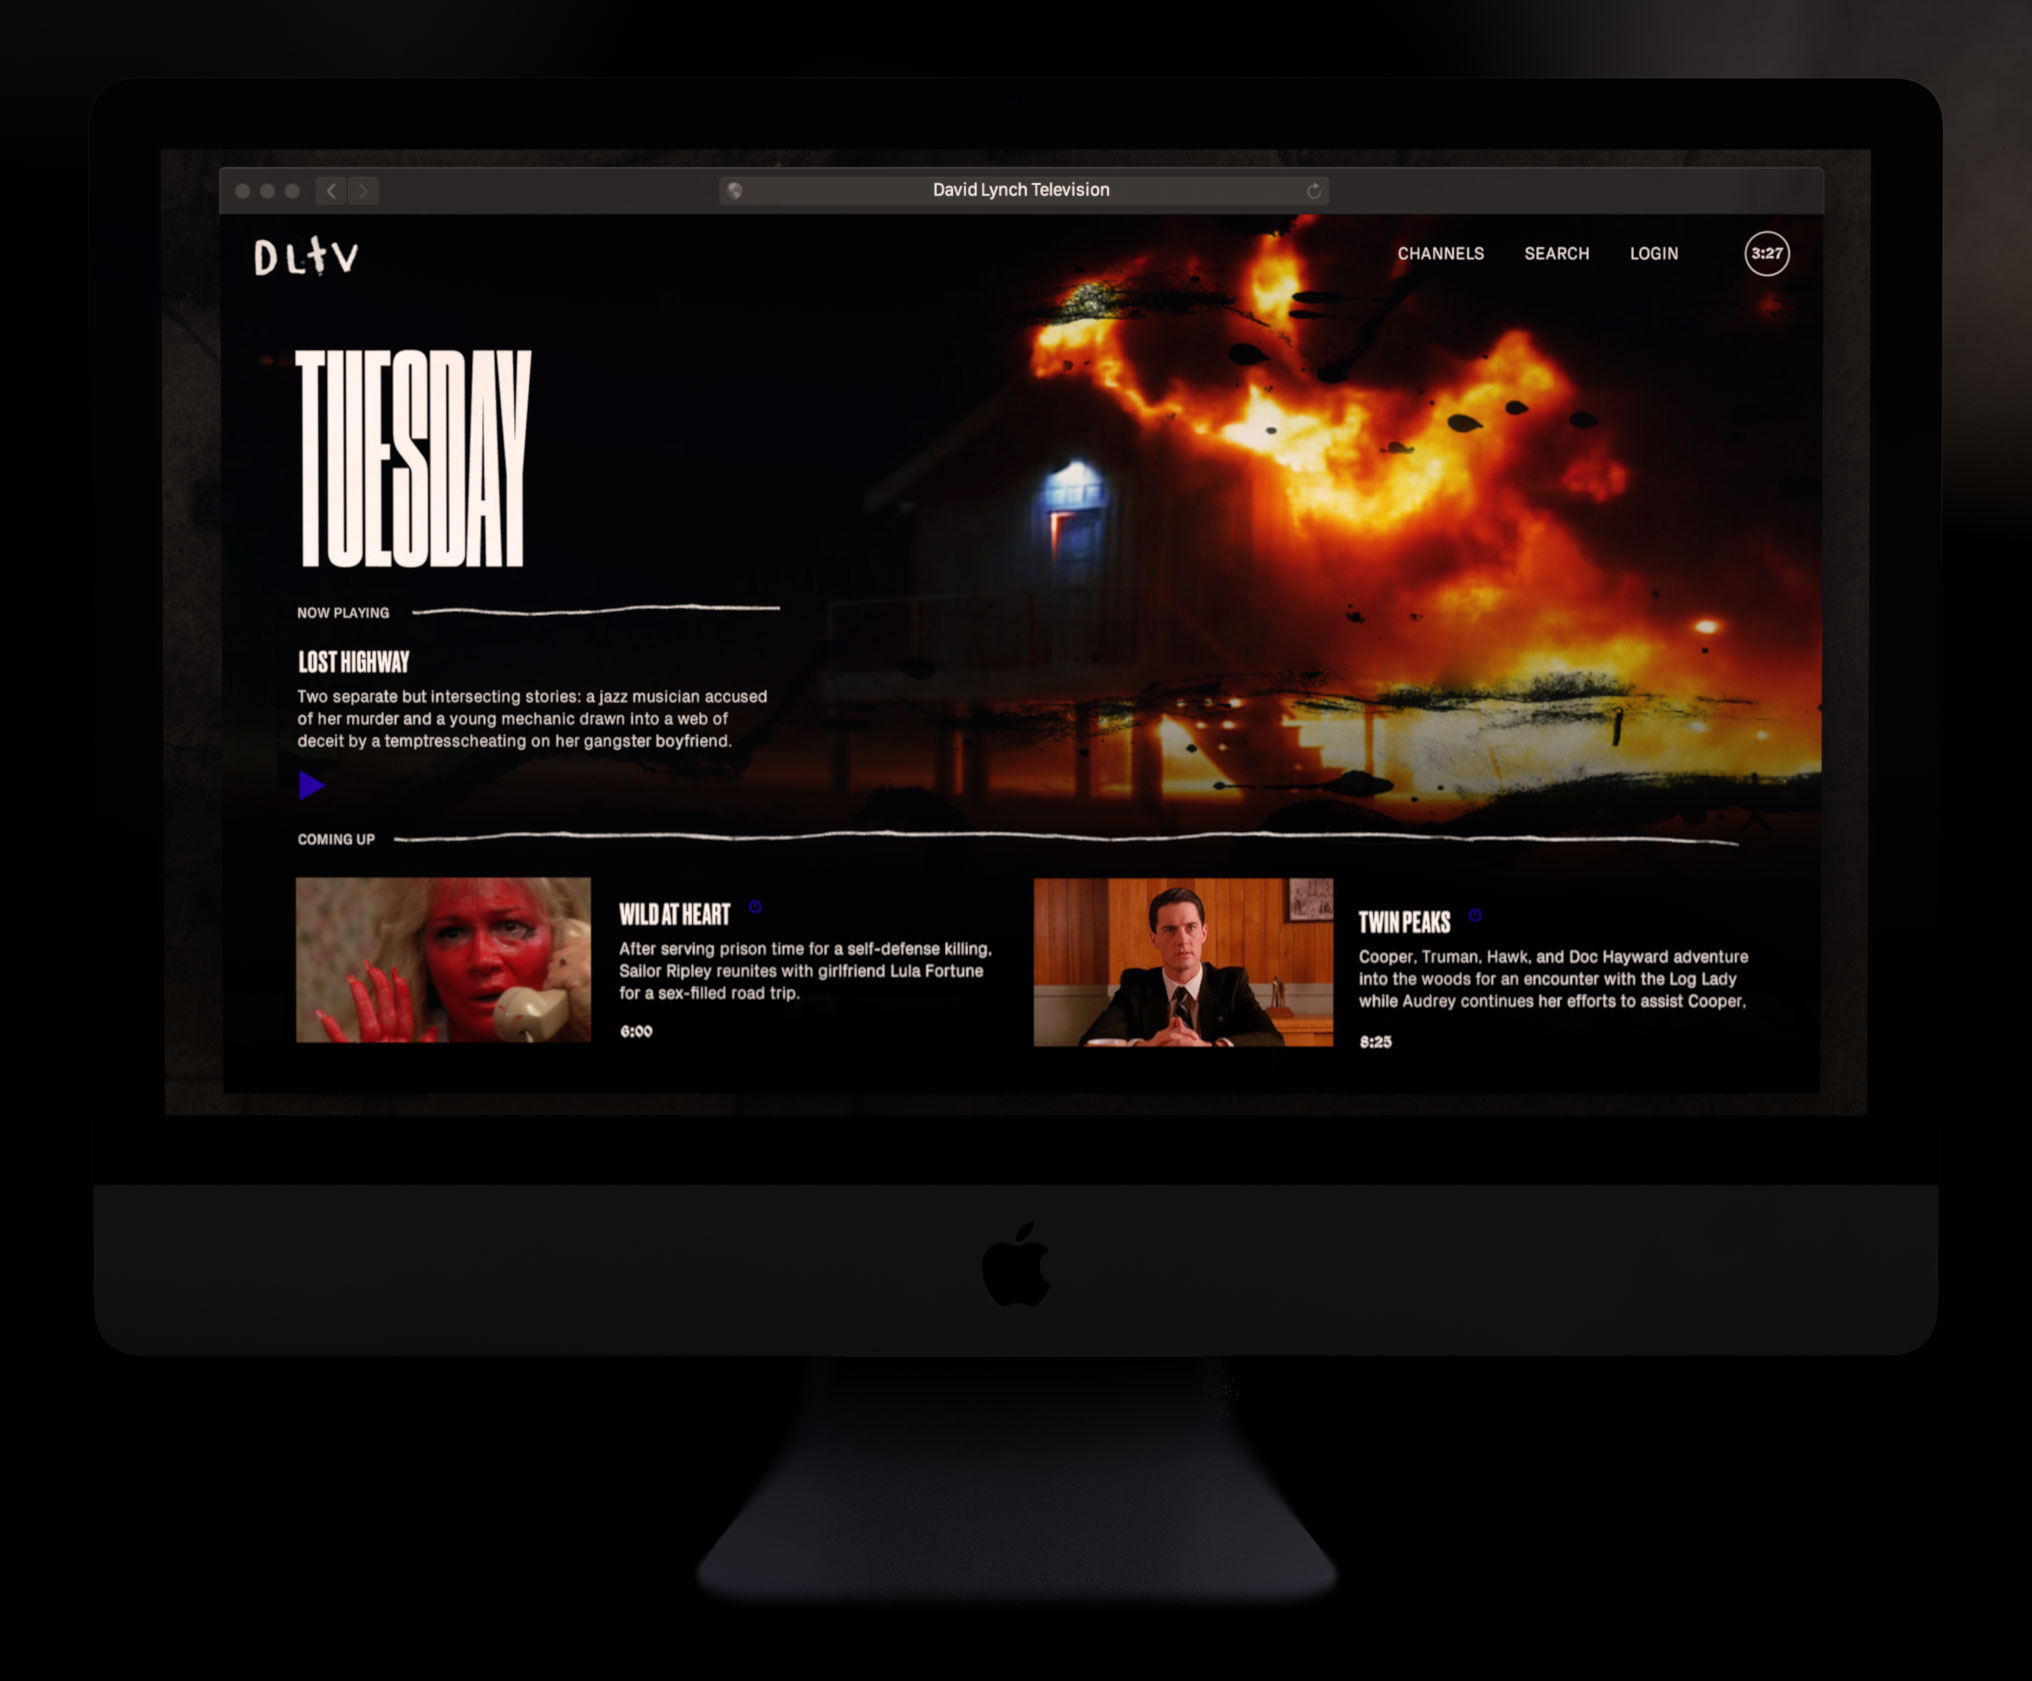 Web Design for Streaming Service David Lynch Television